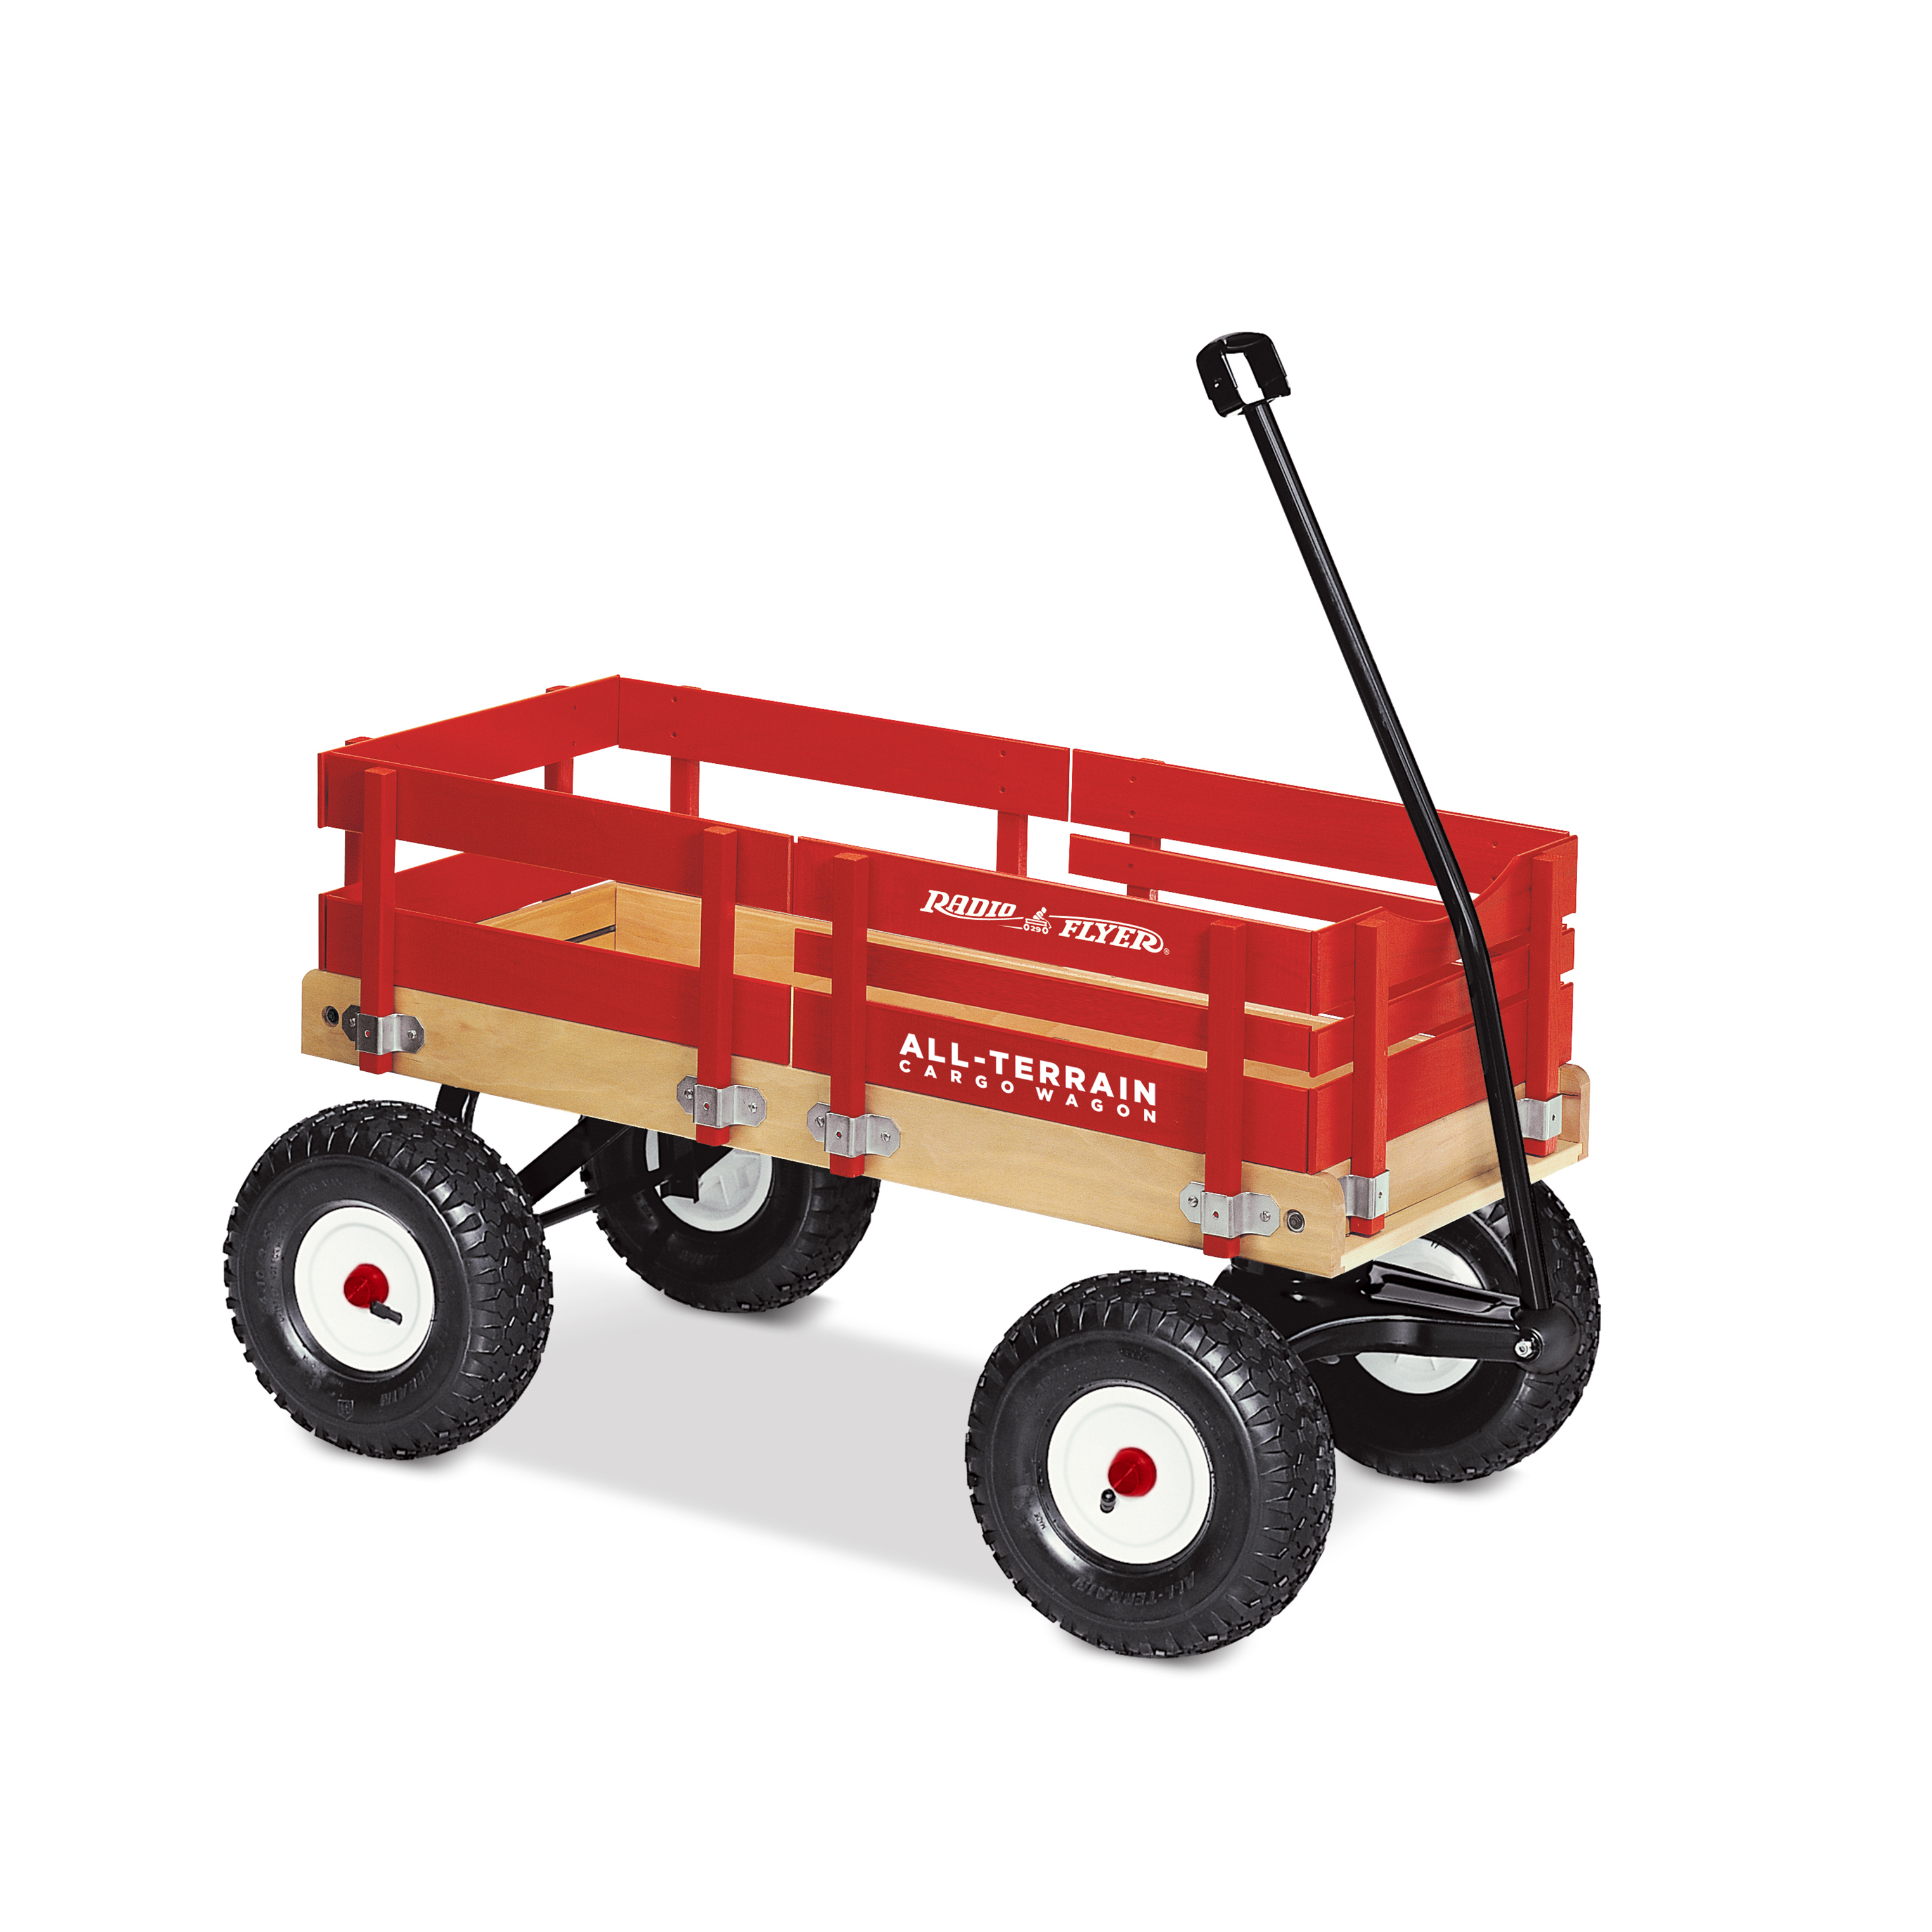 Radio Flyer, All-Terrain Wood Cargo Wagon, Air Tires, Red - image 1 of 8